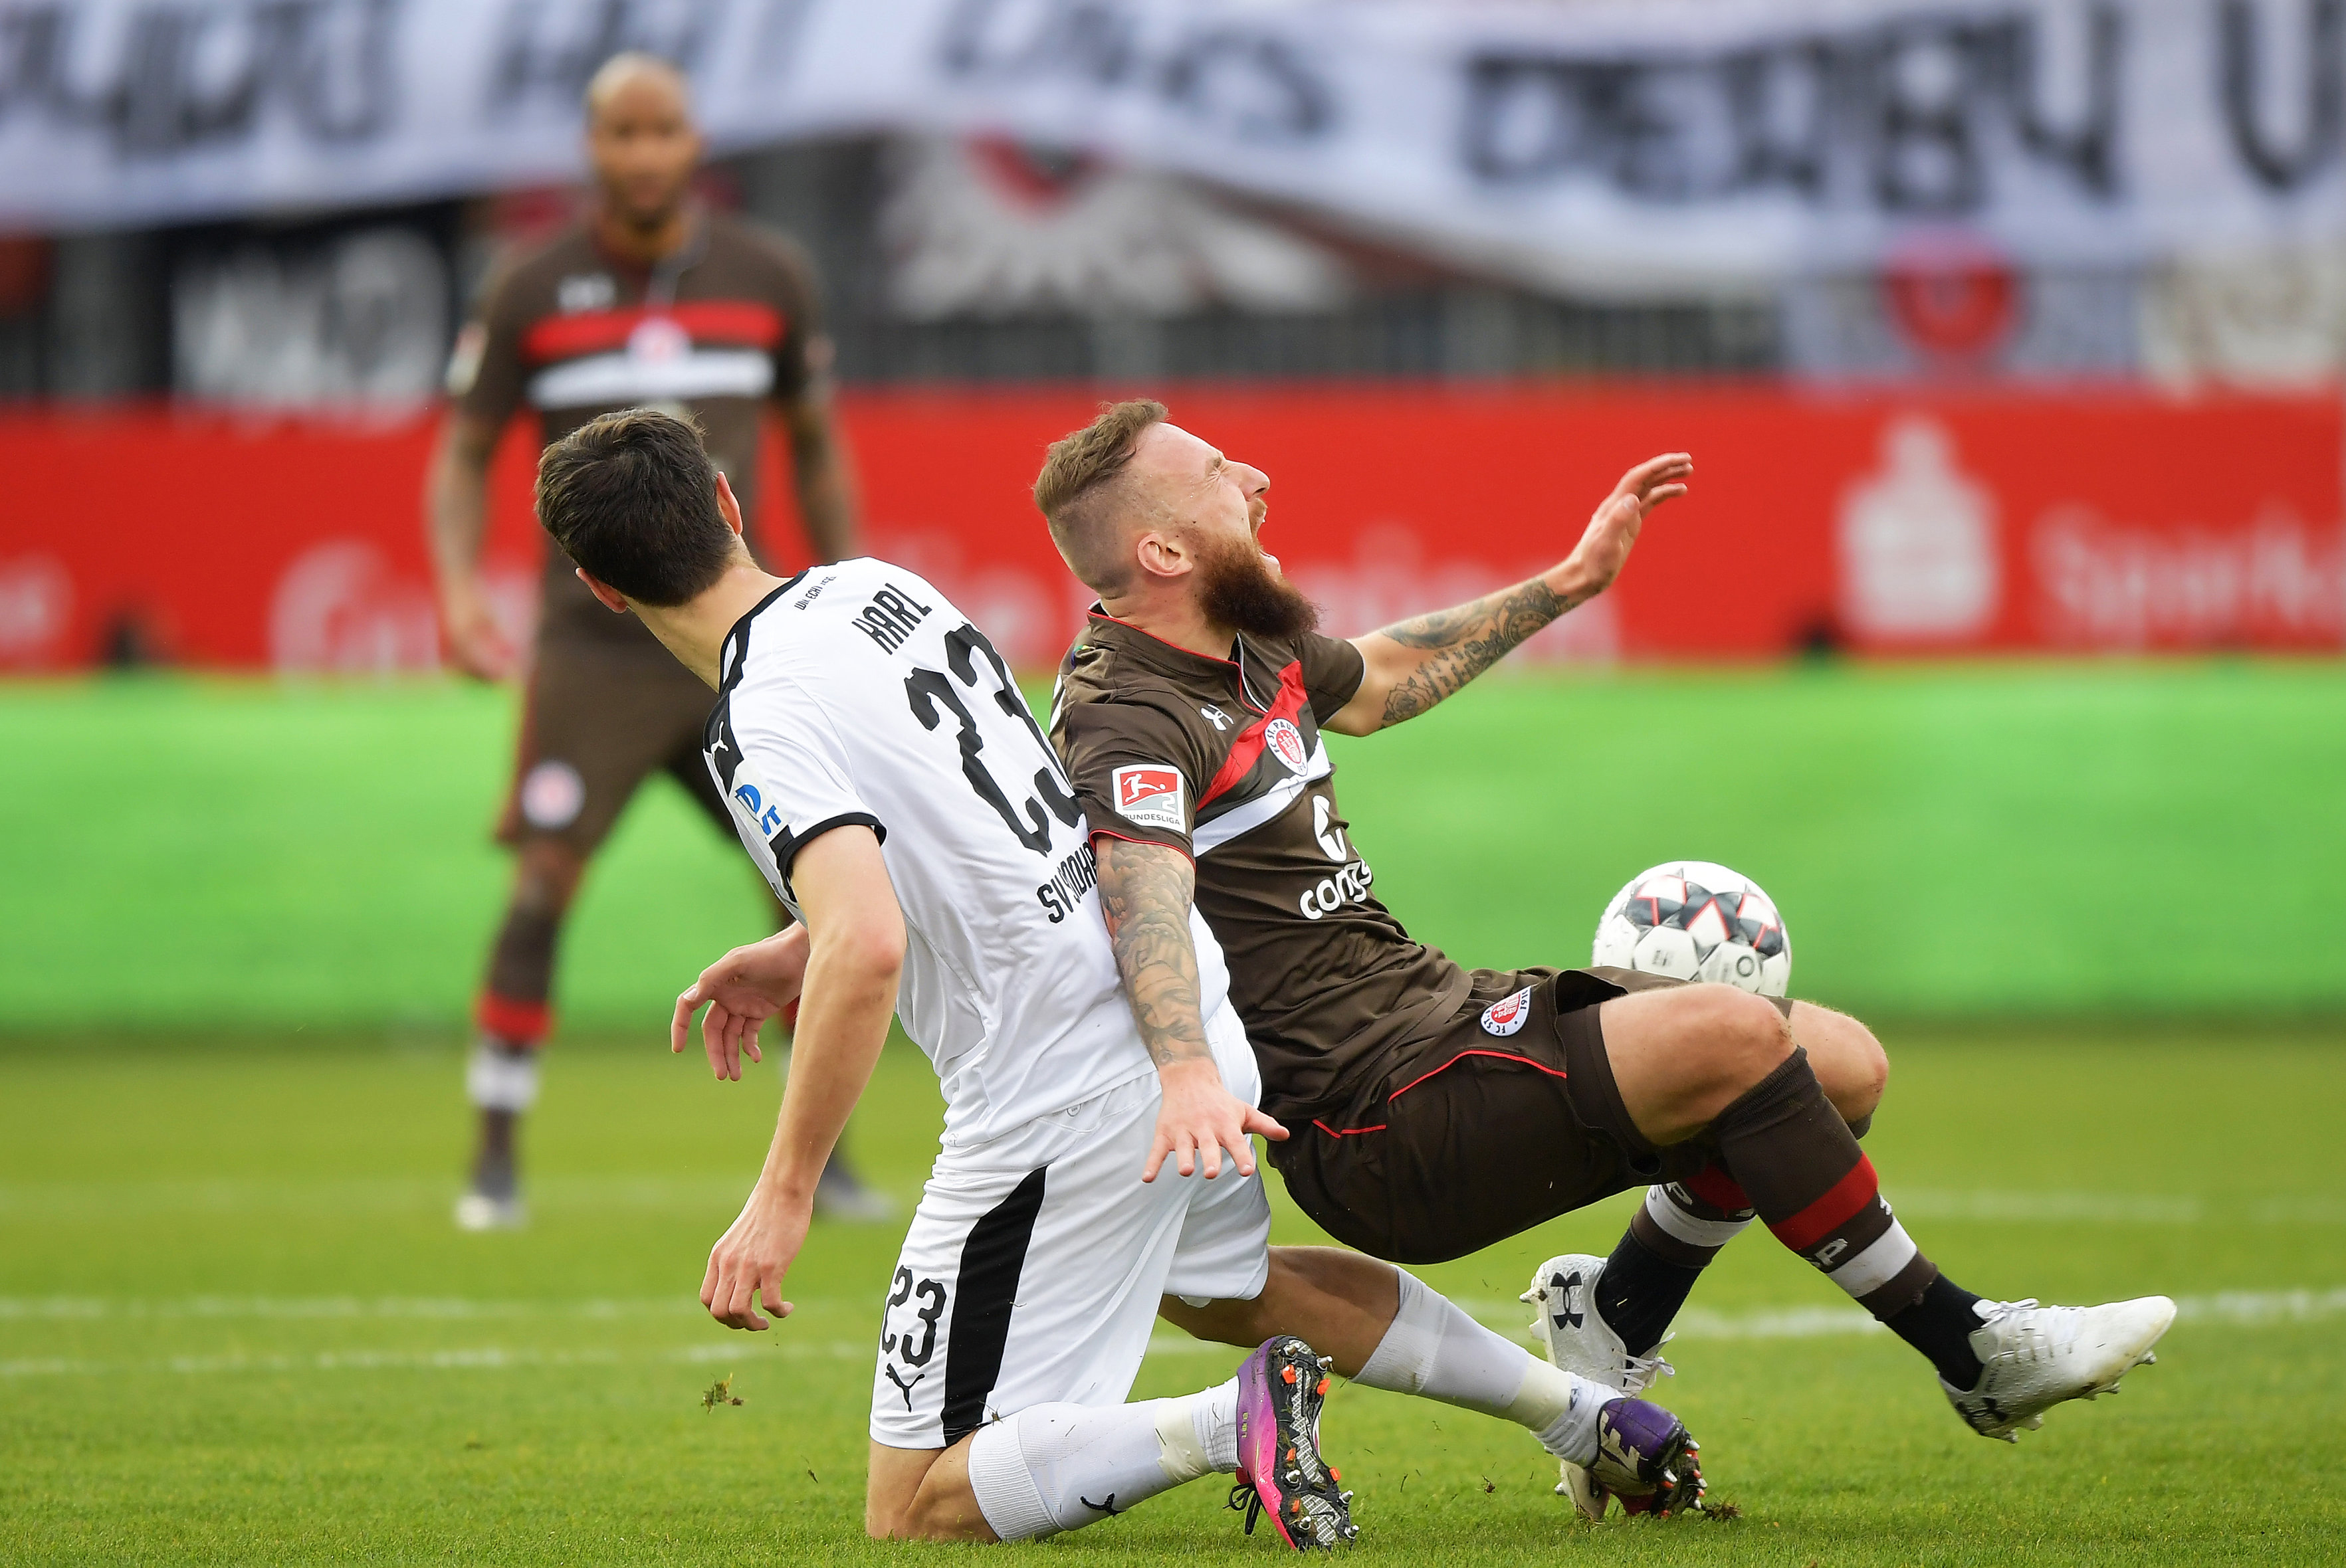 Marvin Knoll challenges for the ball with Sandhausen's Markus Karl.